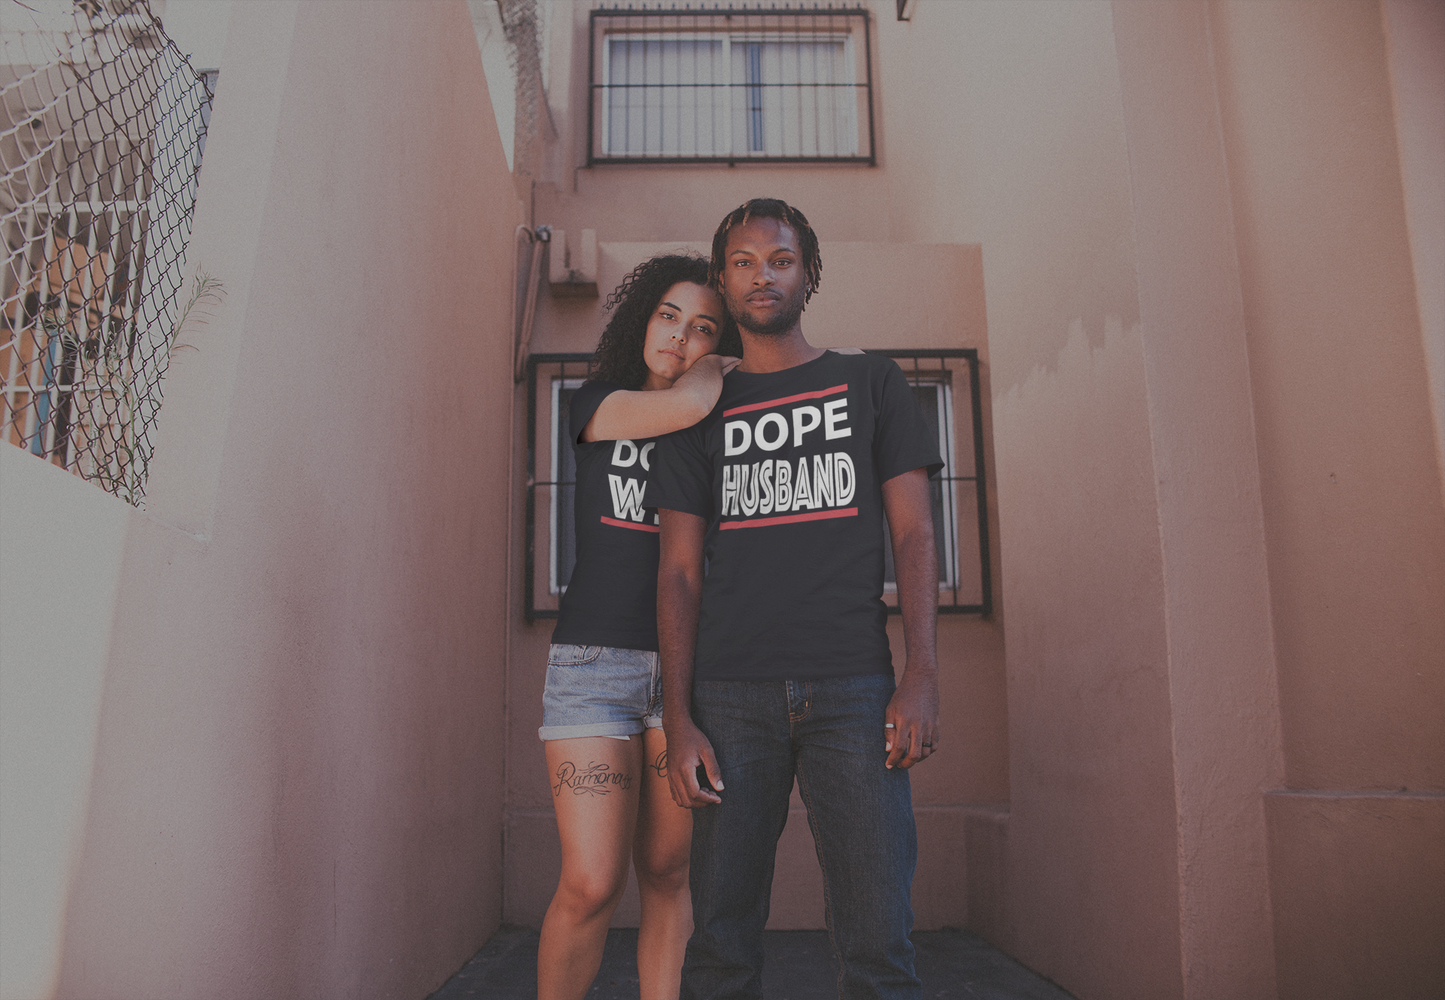 Couples - Dope Husband and Dope Wife